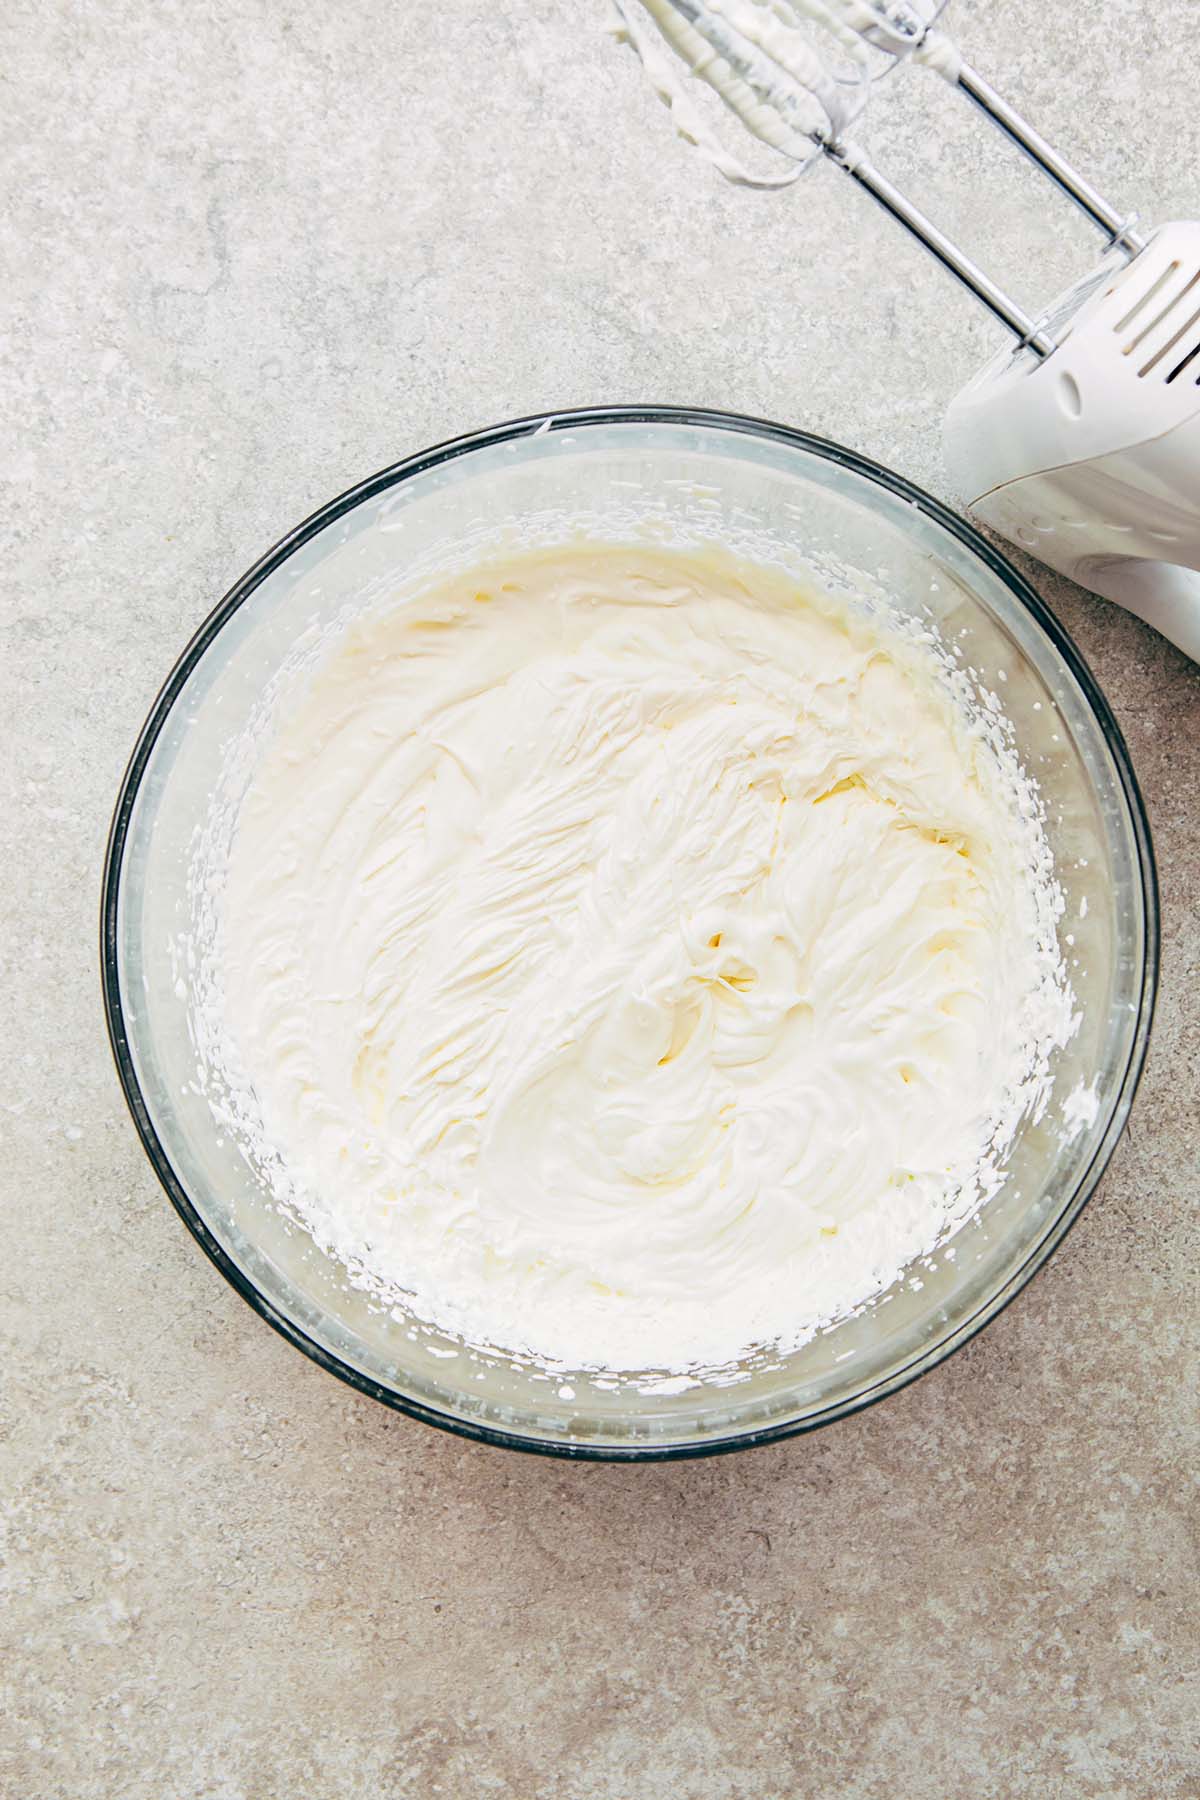 A large glass bowl of whipped cream.